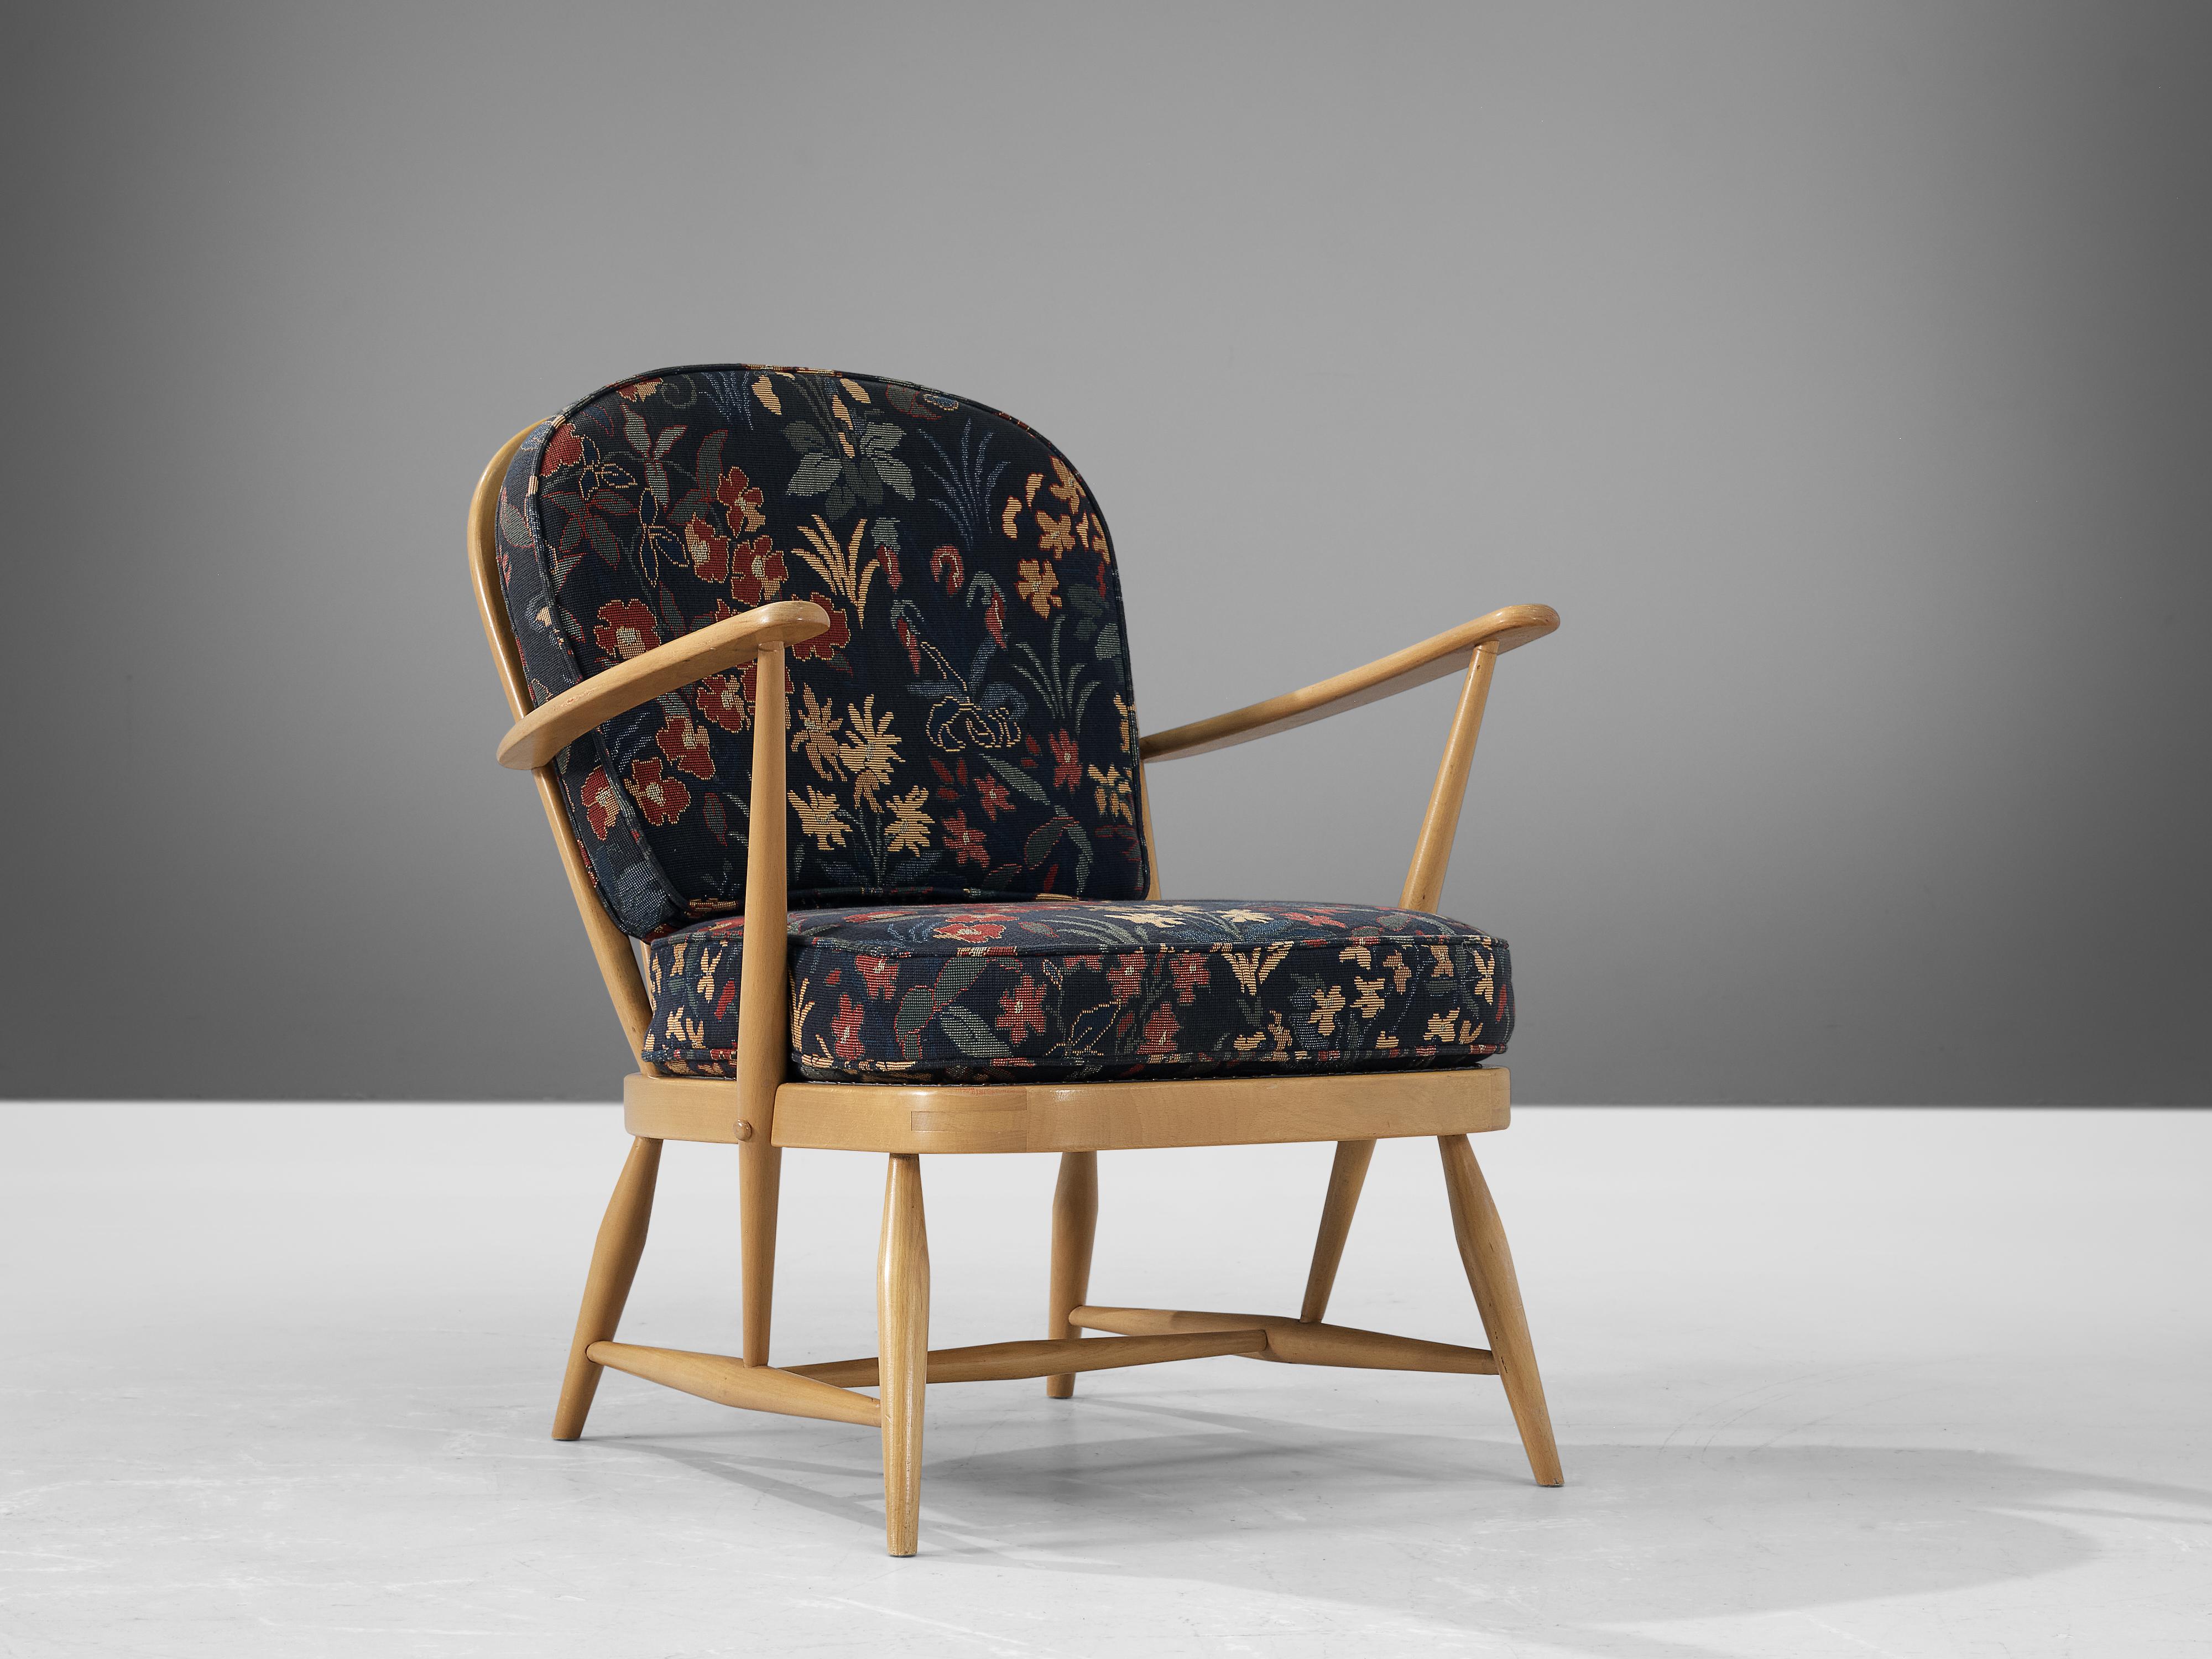 Lucian Ercolani for Ercol, ‘Windsor’ lounge chair, fabric and beech, United Kingdom, 1970s 

The Italian born English designer Lucian Ercolani designed the ‘Windsor’ chair for his own company Ercol in the 1950s, although this particular chair